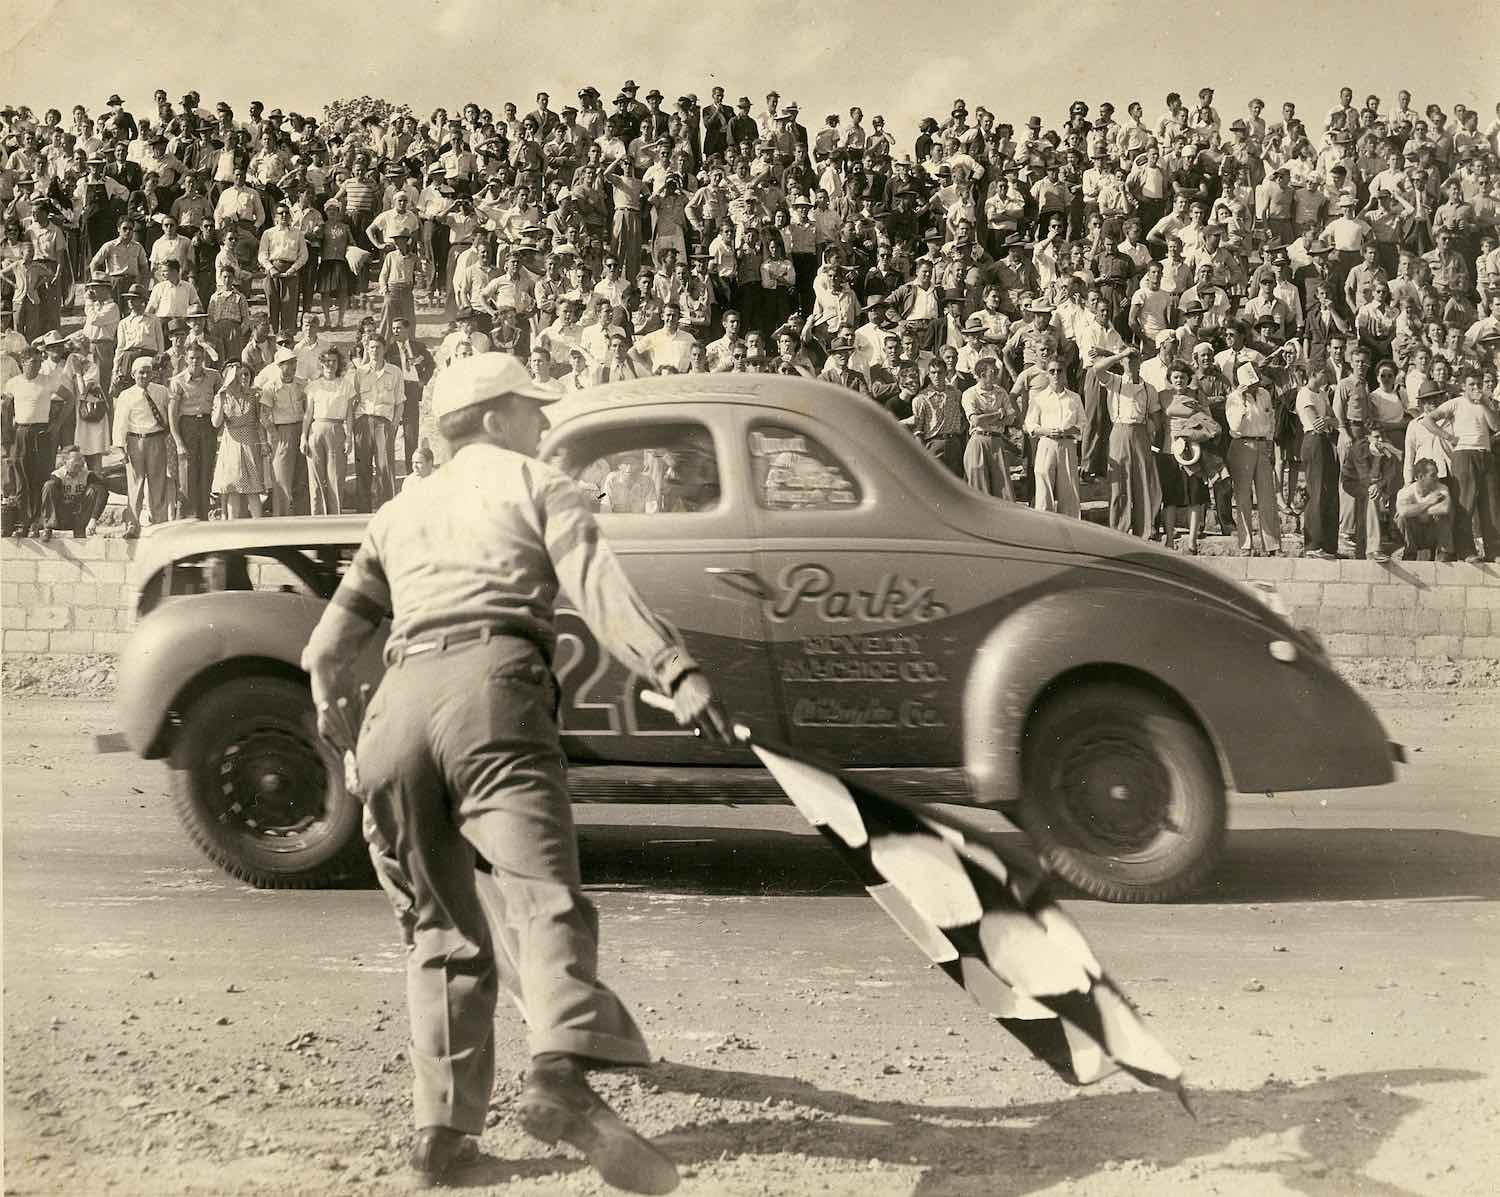 Red Byron wins the first race with the NASCAR name on Daytona Beach in Florida.